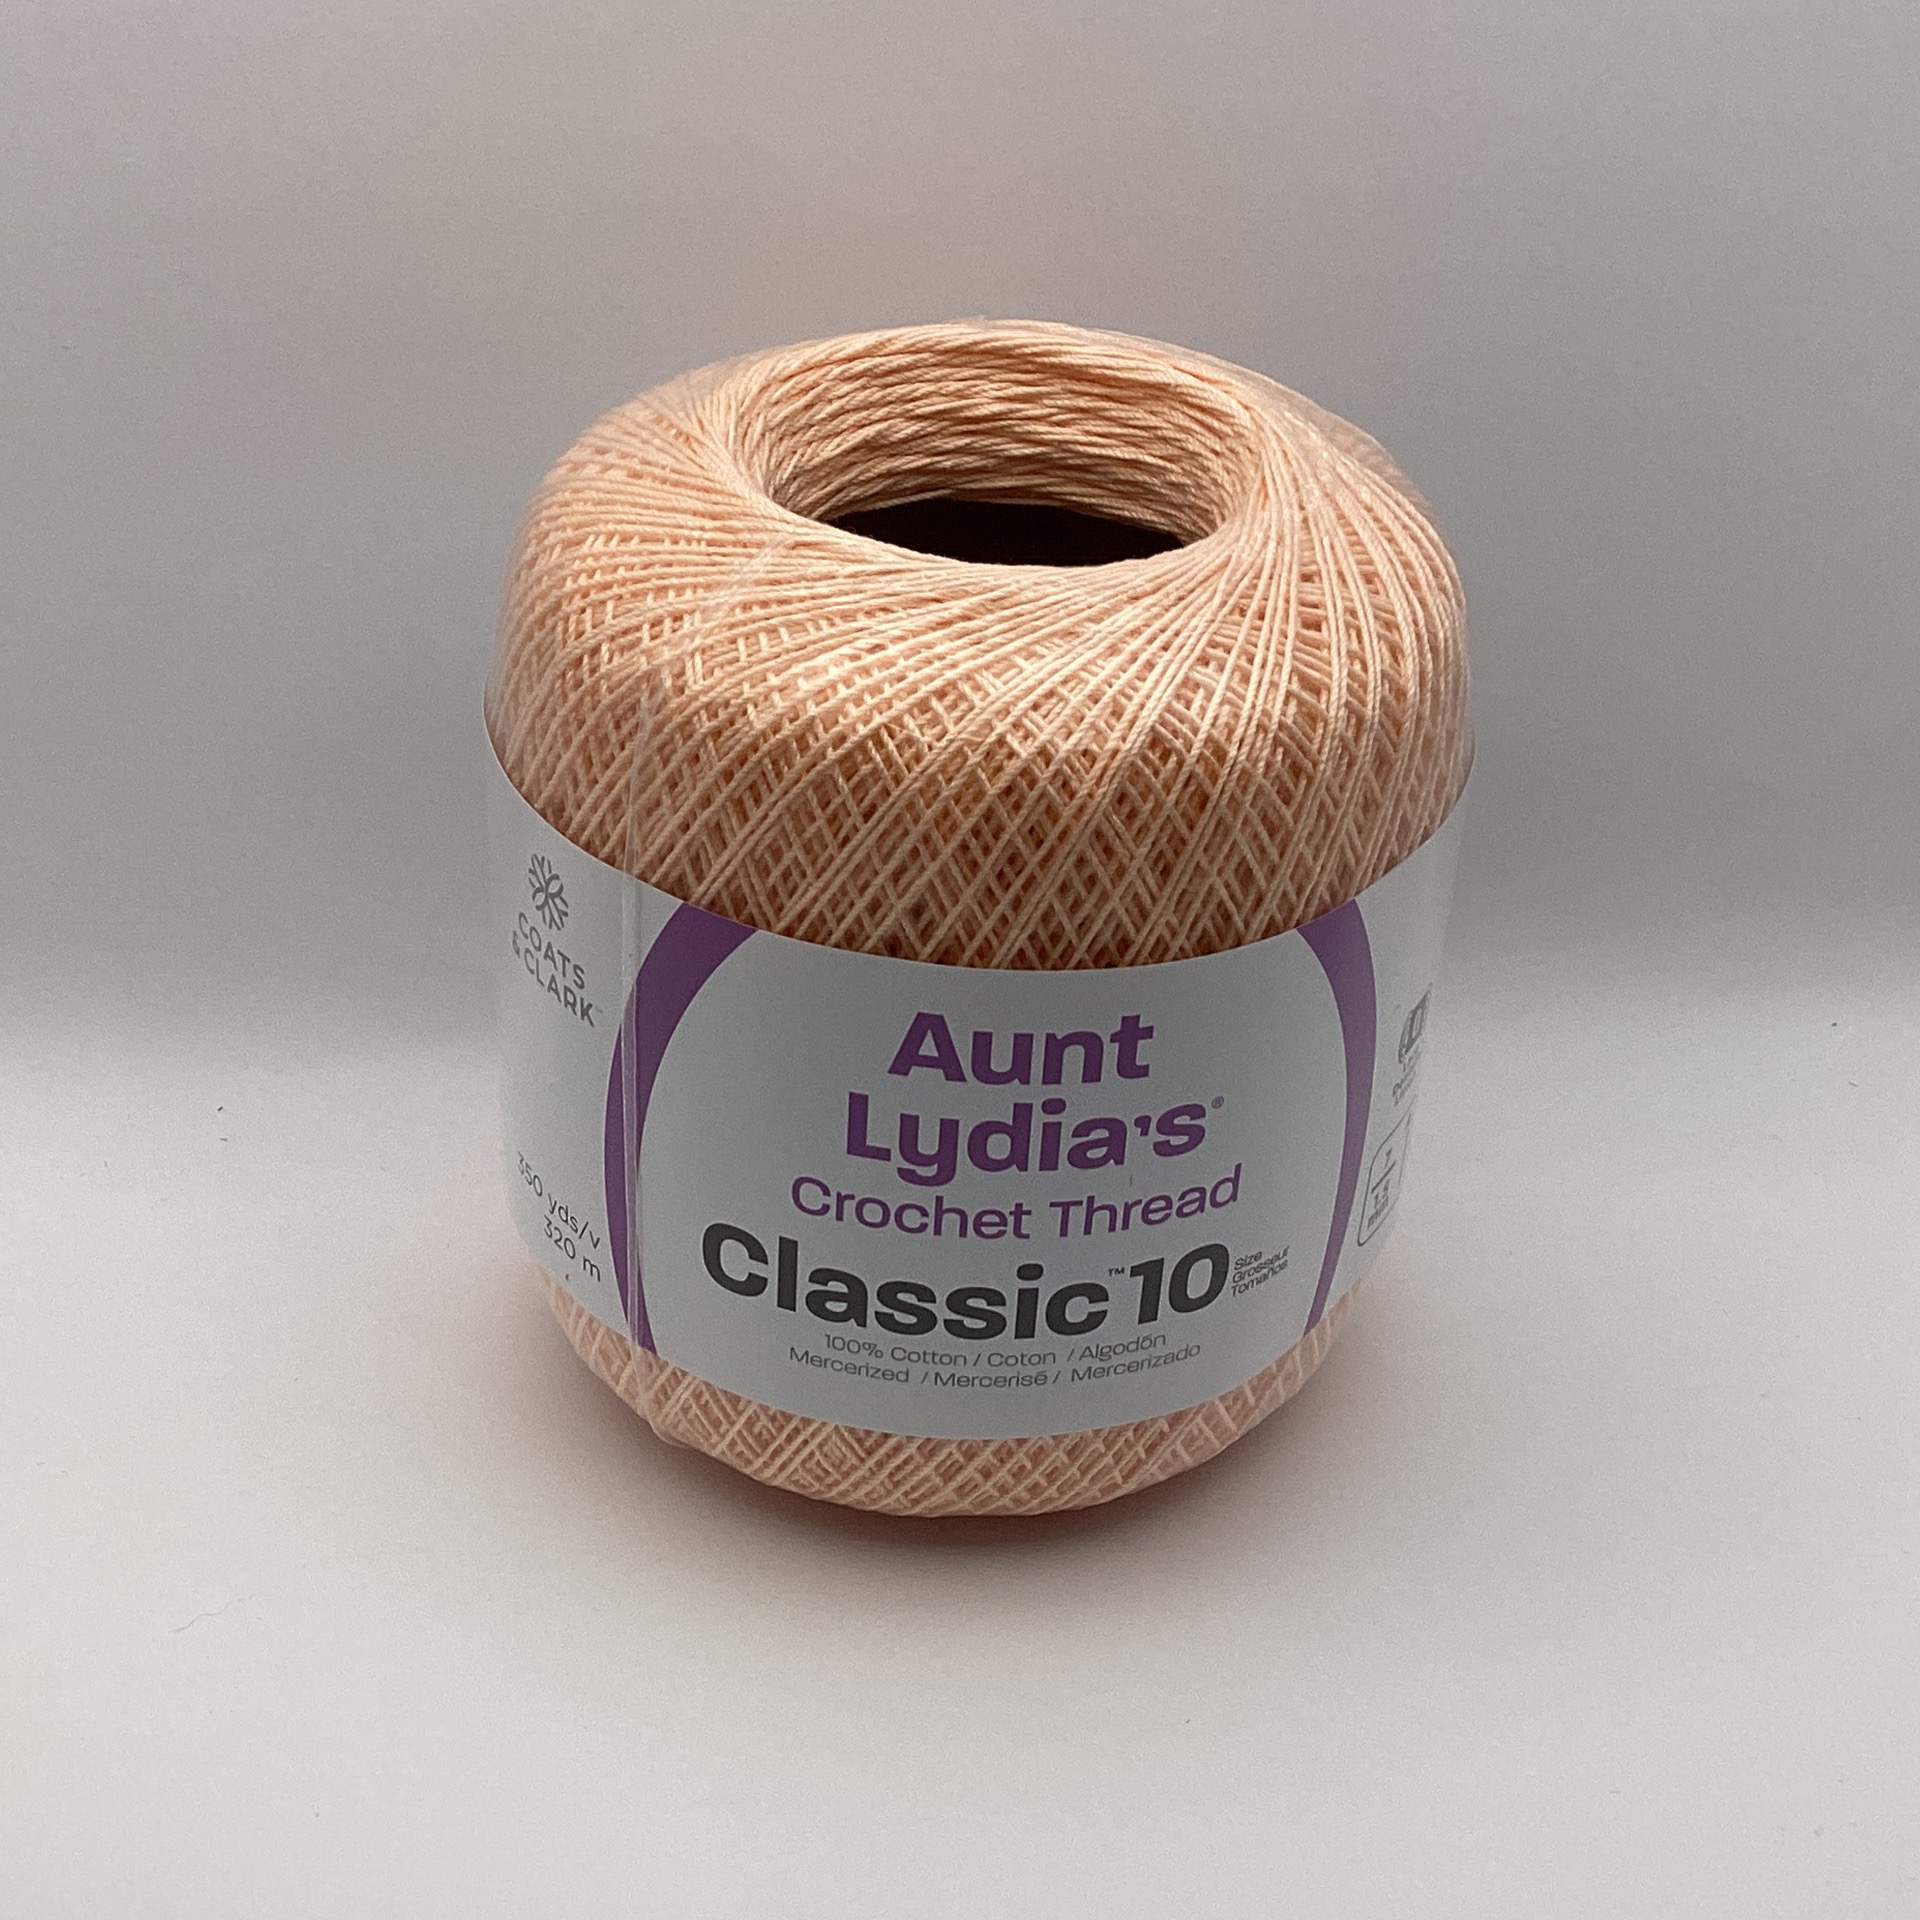 Aunt Lydia's Classic Cotton Crochet Thread, Size 10 - Hot Pink